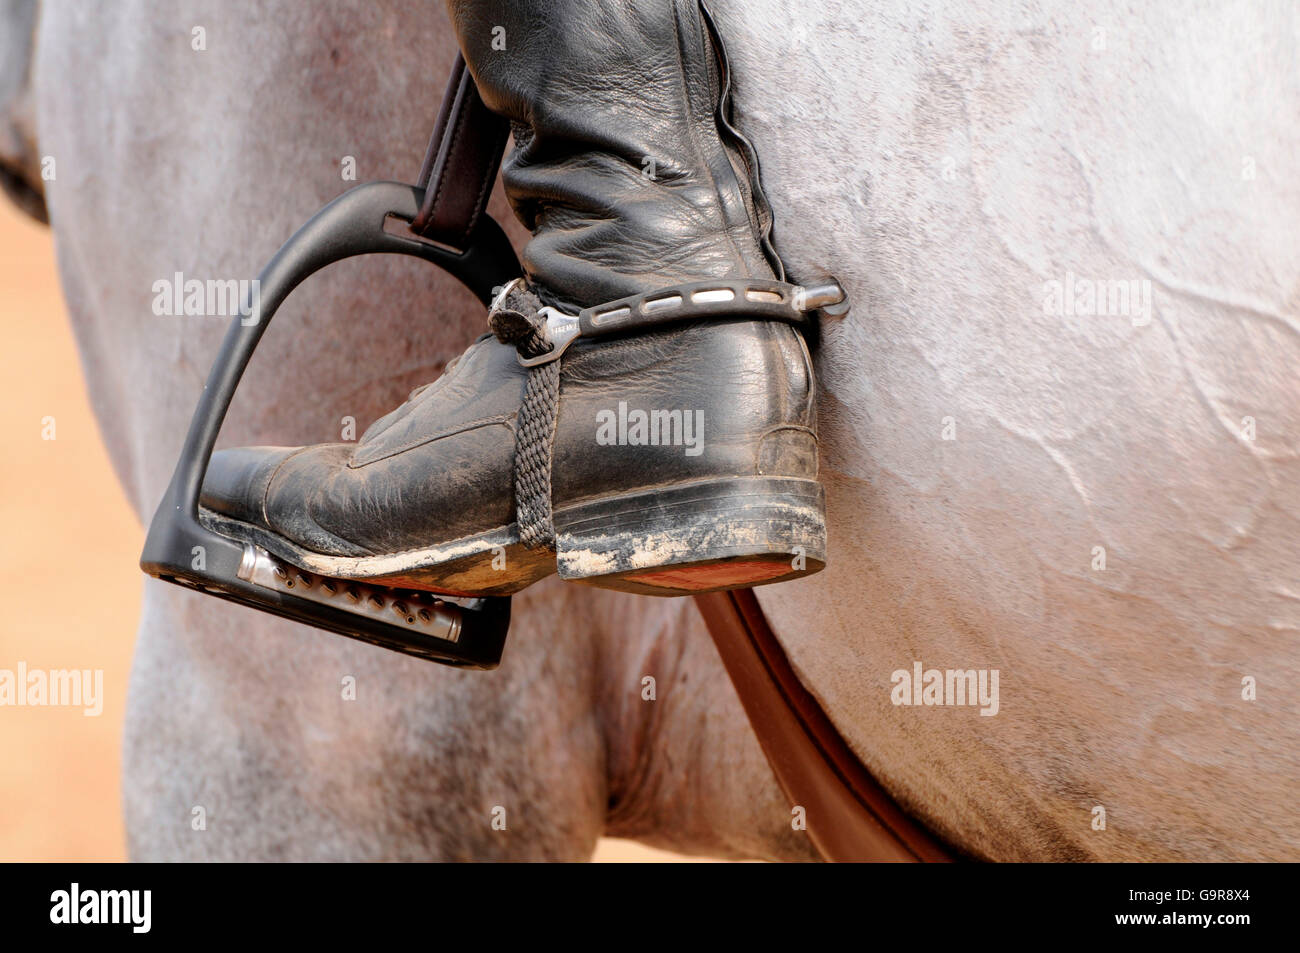 Stirrup, Riding Boots with applied spur Stock Photo